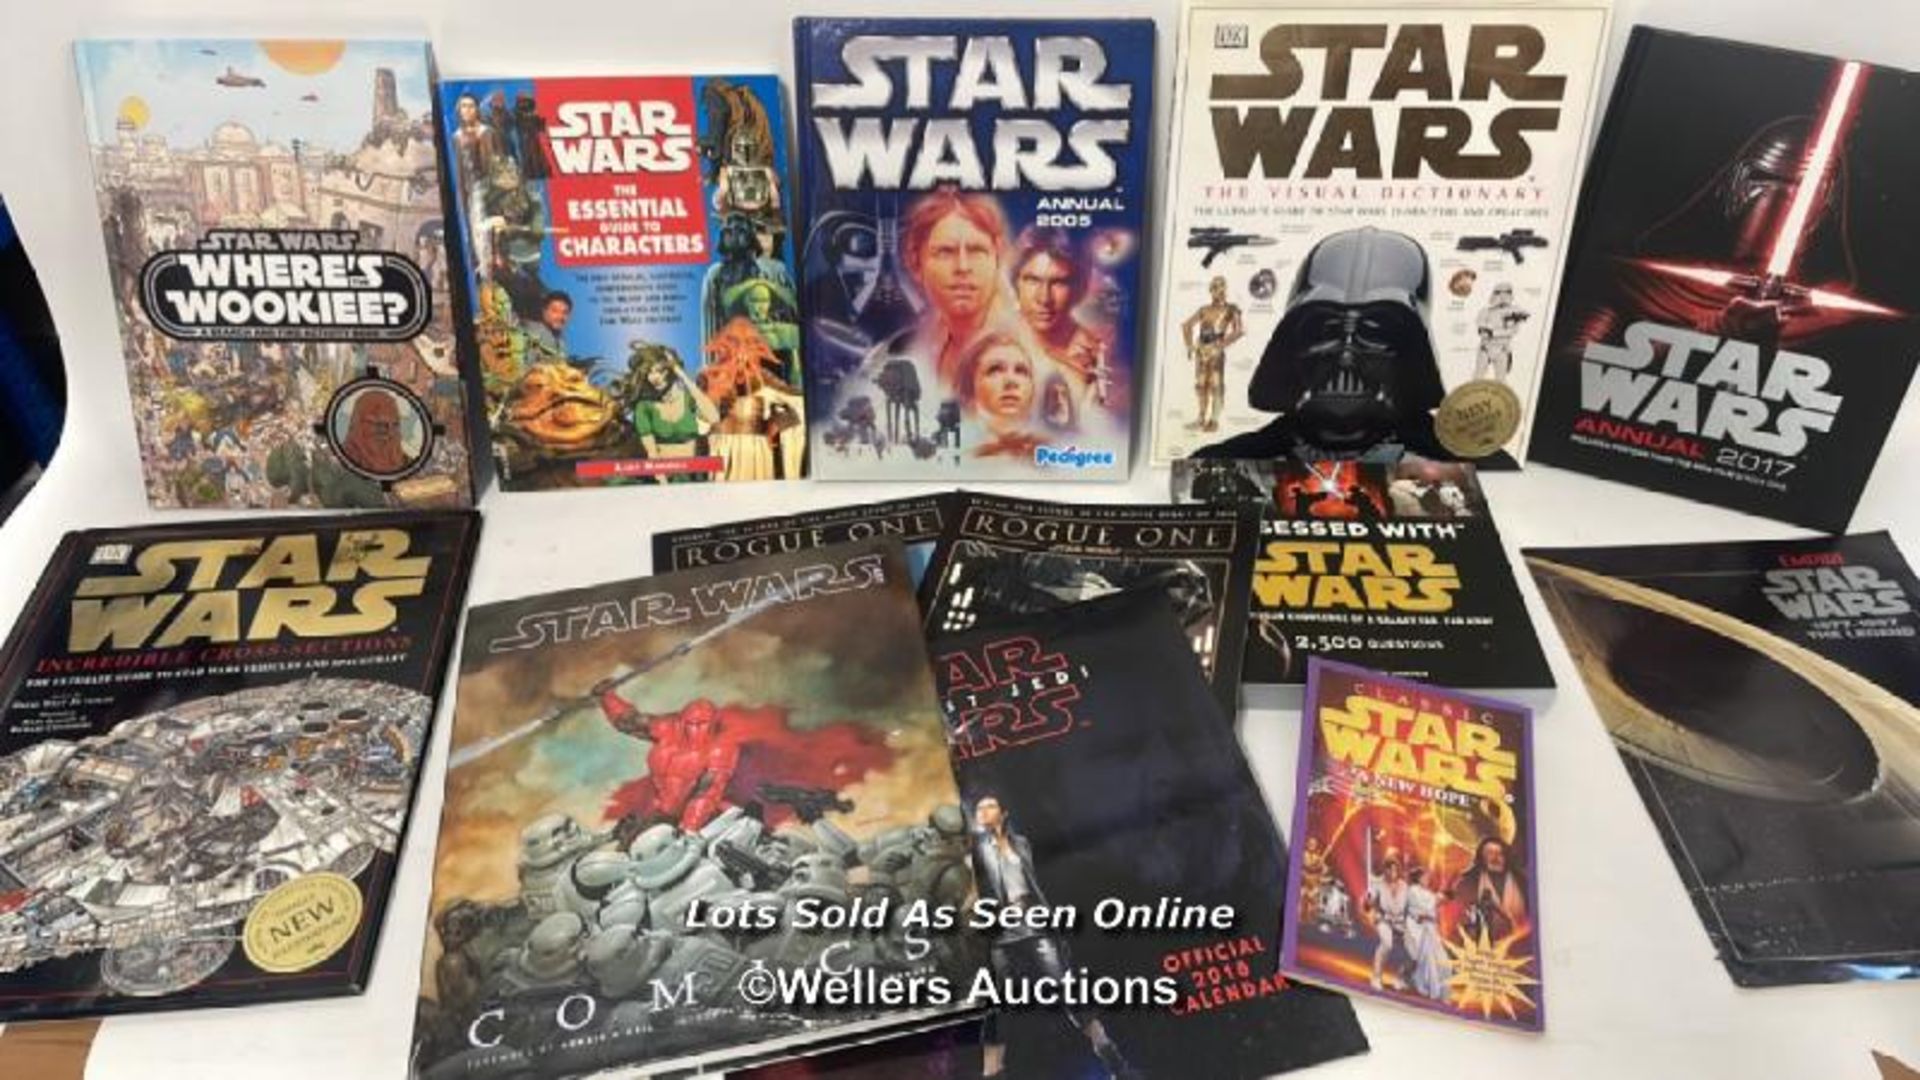 Star Wars books, annuals and calender including Star Wars Comics Art